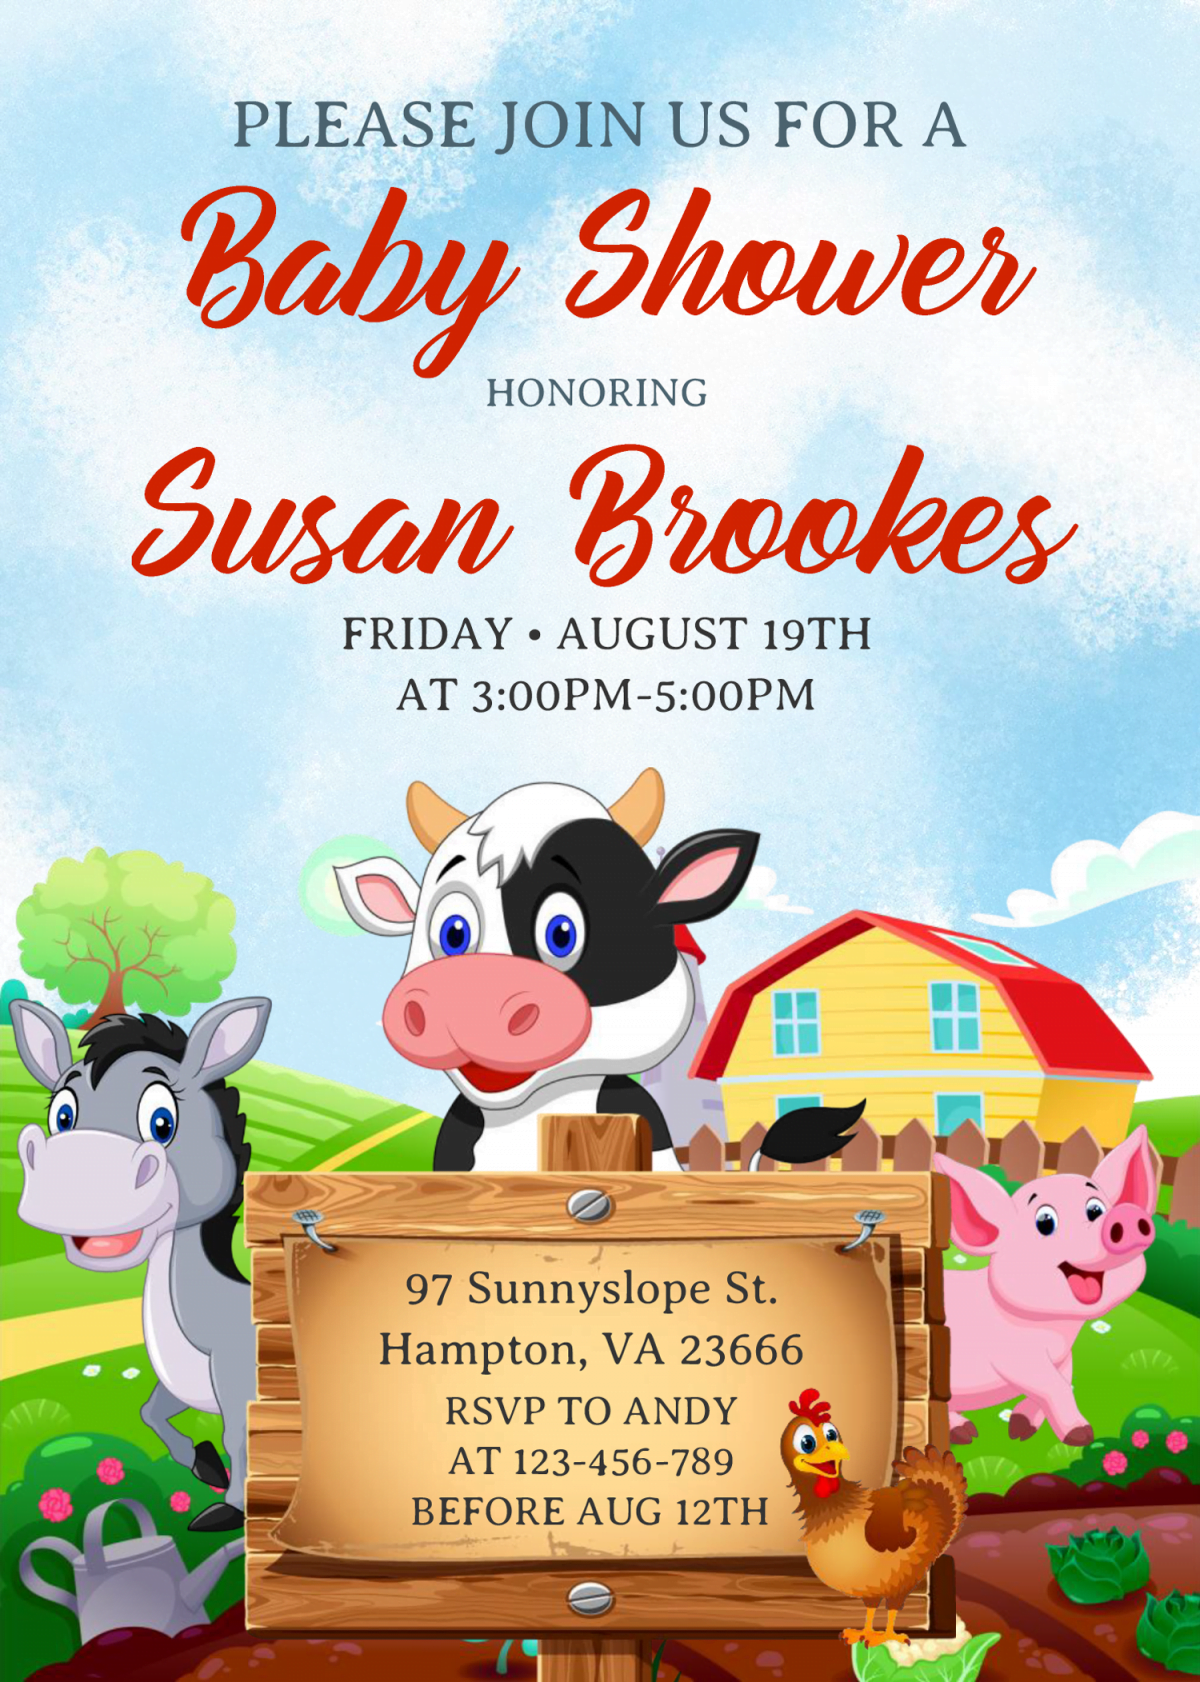 Farm Animals Invitation Templates - Editable With Microsoft Word and has cute cow and donkey